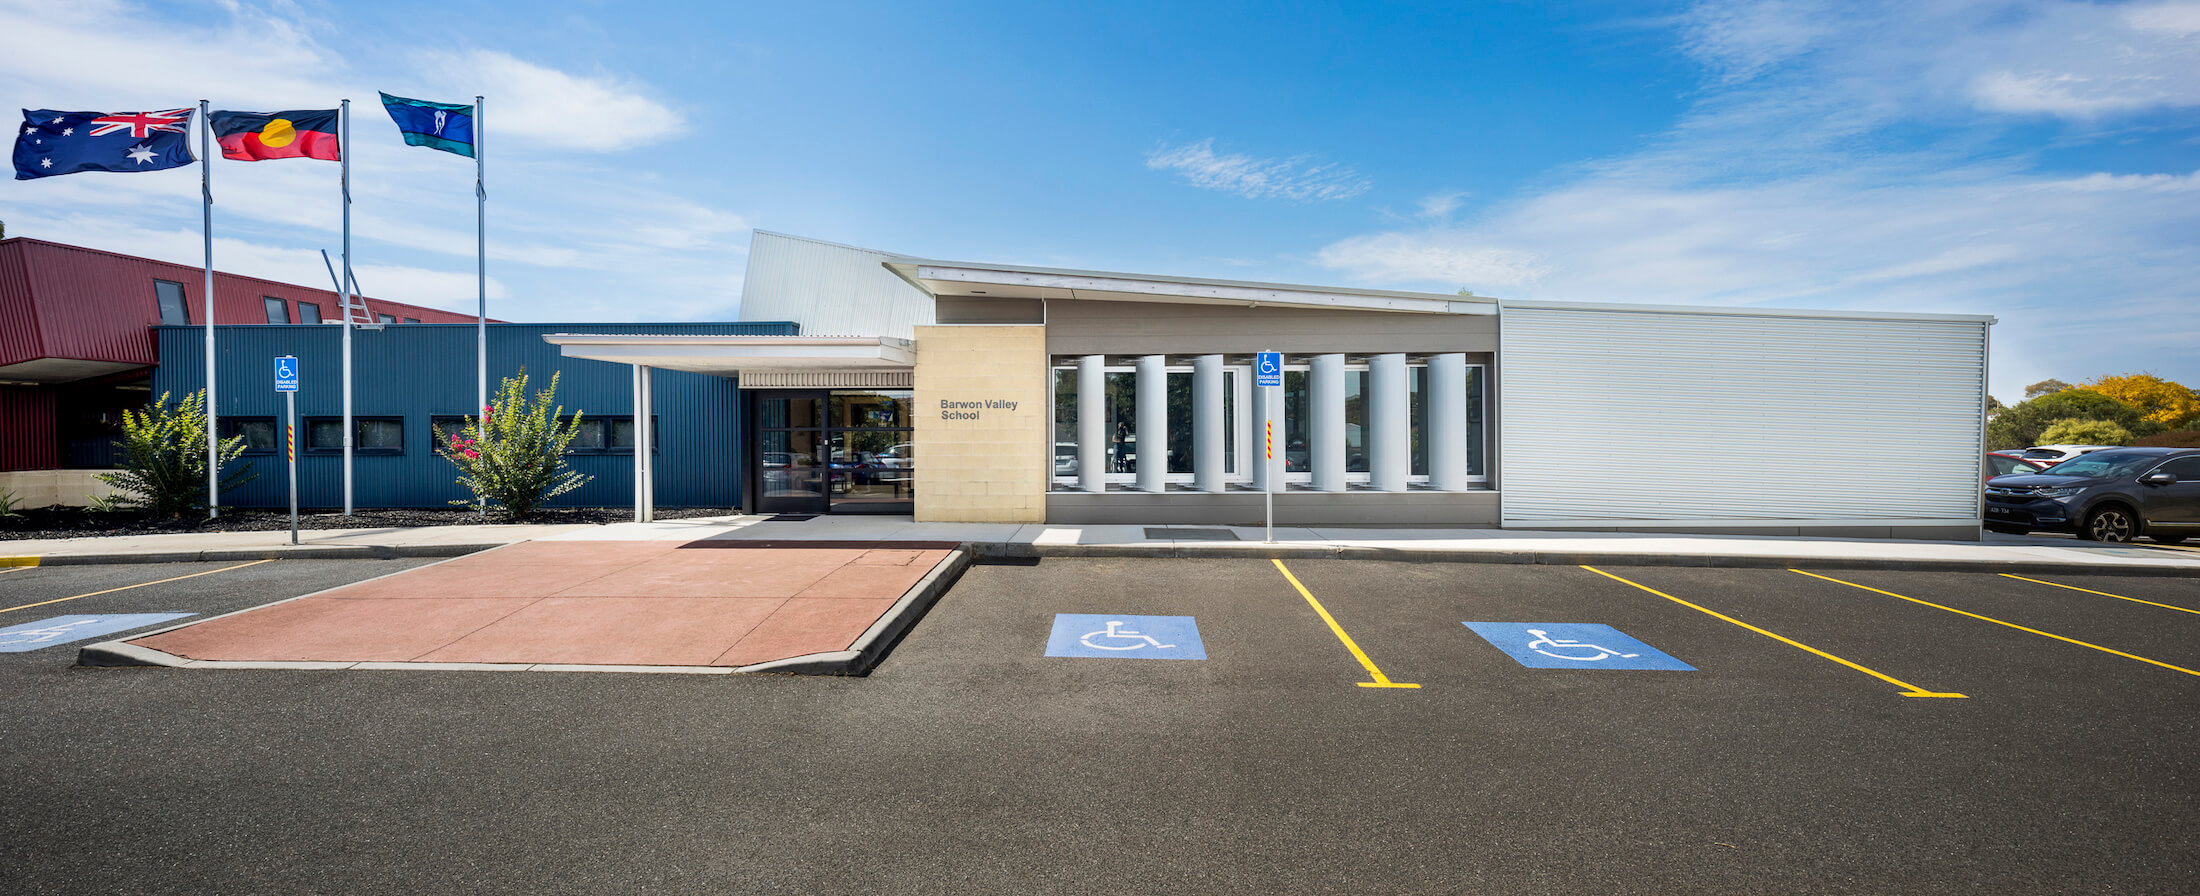 School building facade with Australian, Aboriginal and Torres Strait Islander flags flying, disabled car parking